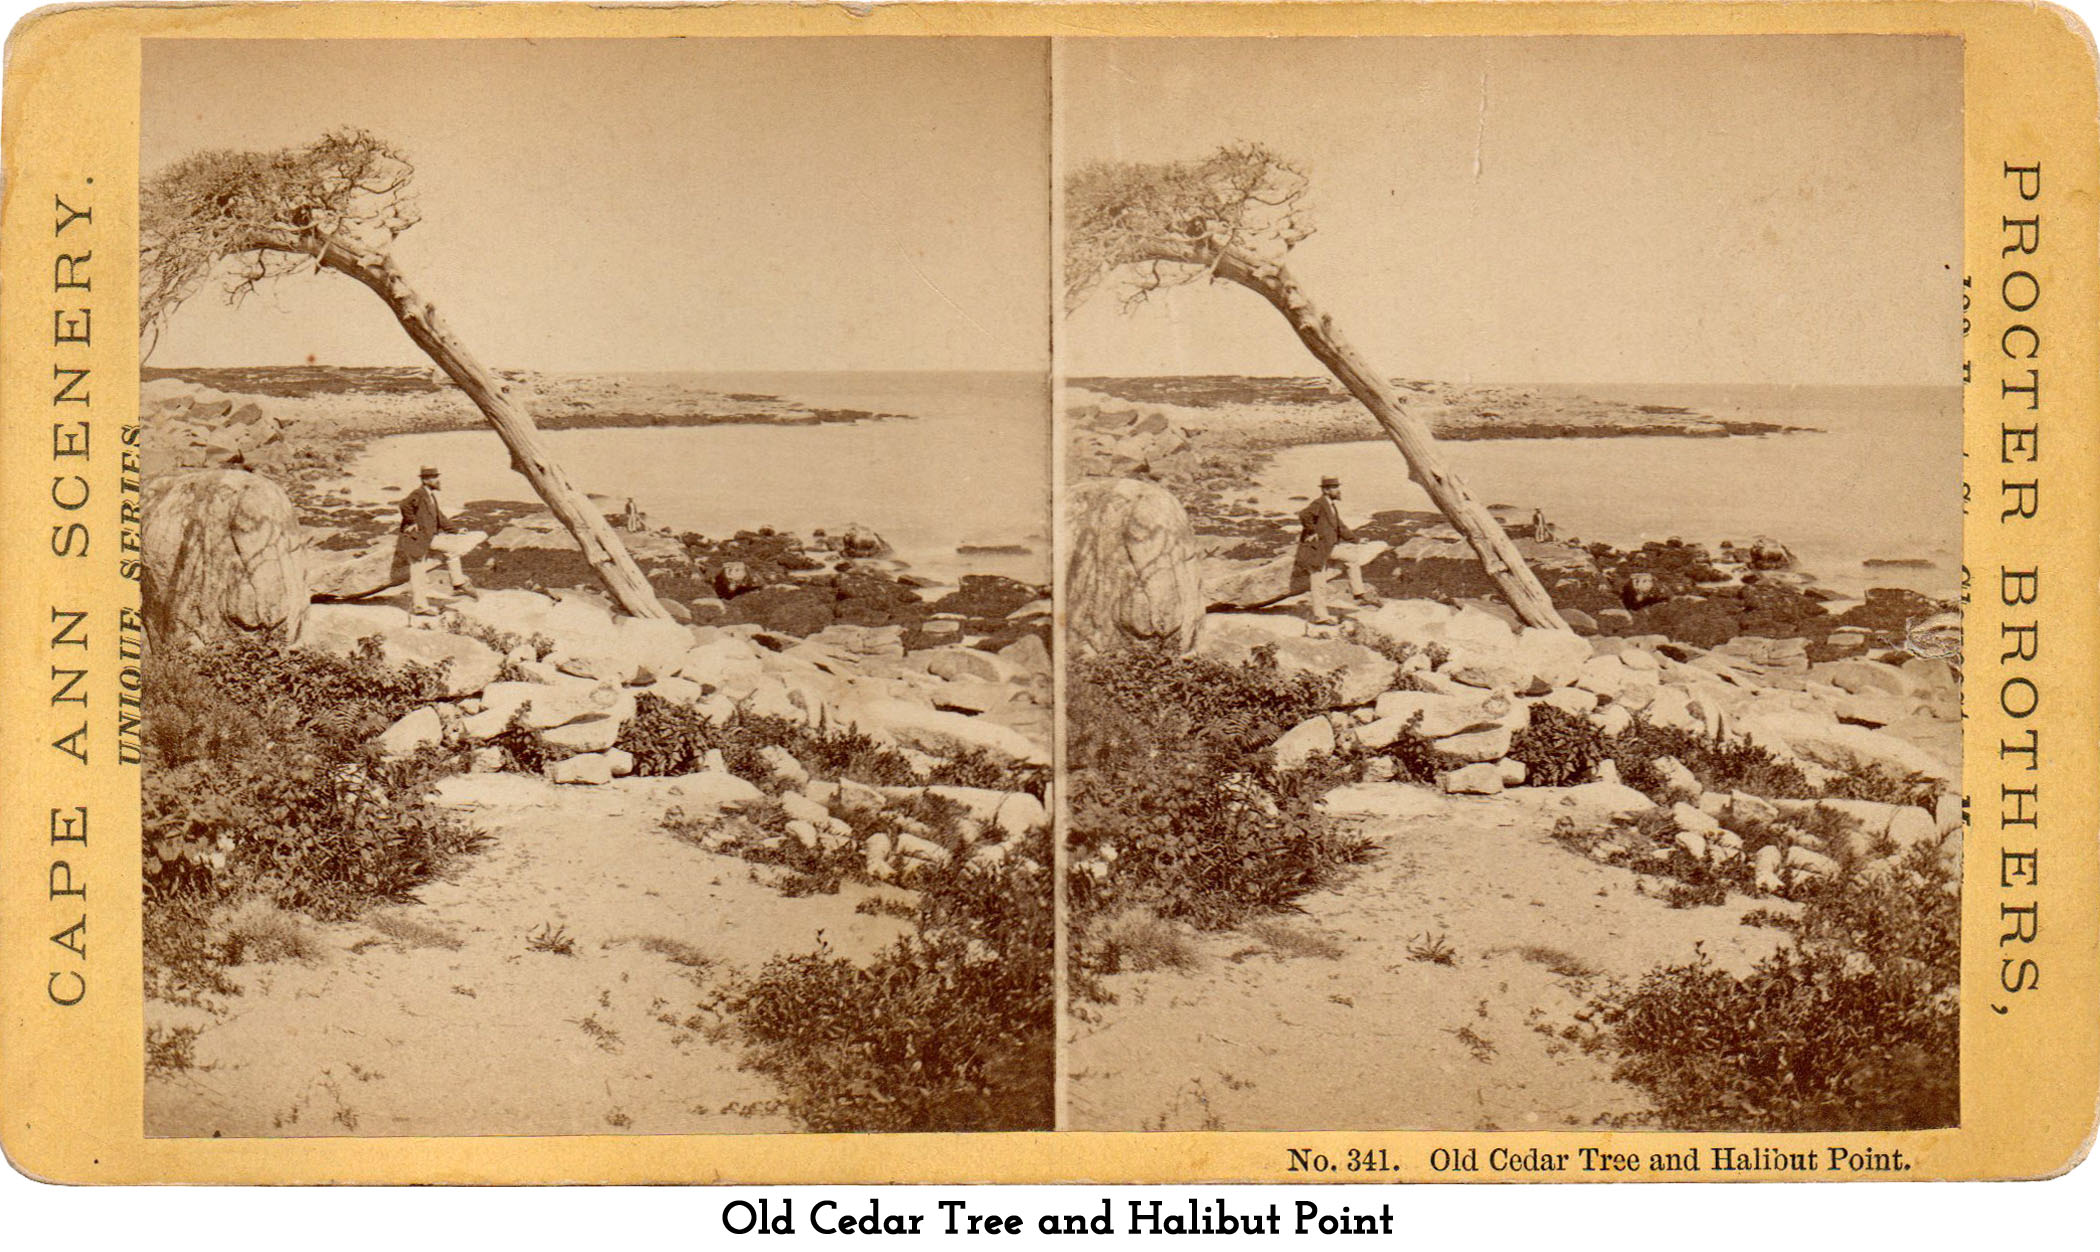 the Old Cedar and Halibut Point